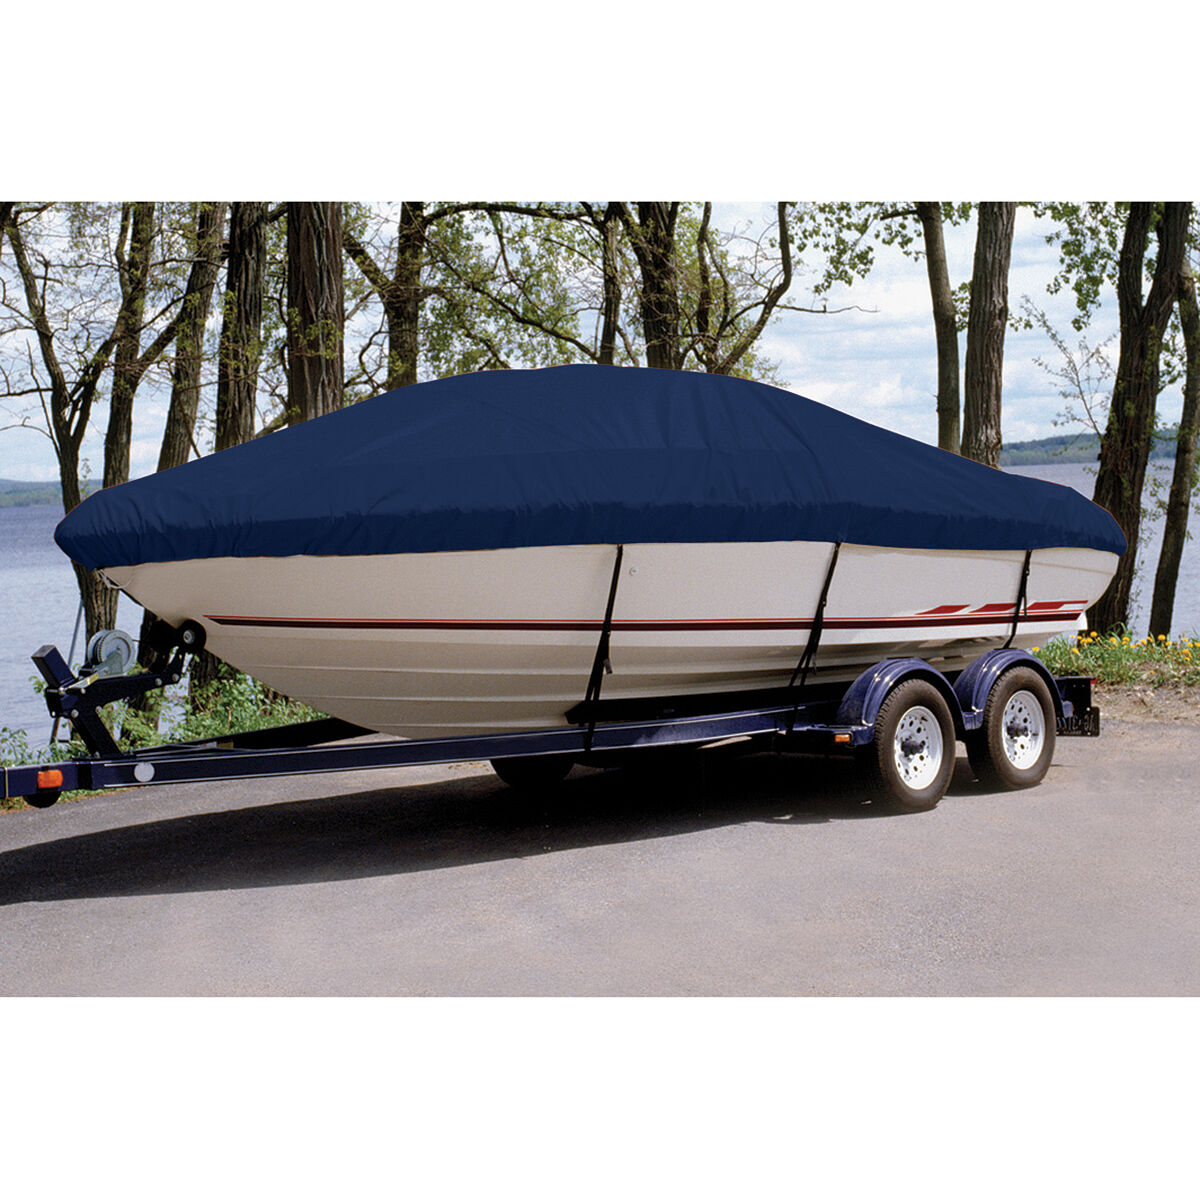 Taylor Trailerite Ultima Cover for 98-01 Klamath 15 Stinger/ADV/SS/R/Hood in Navy Blue